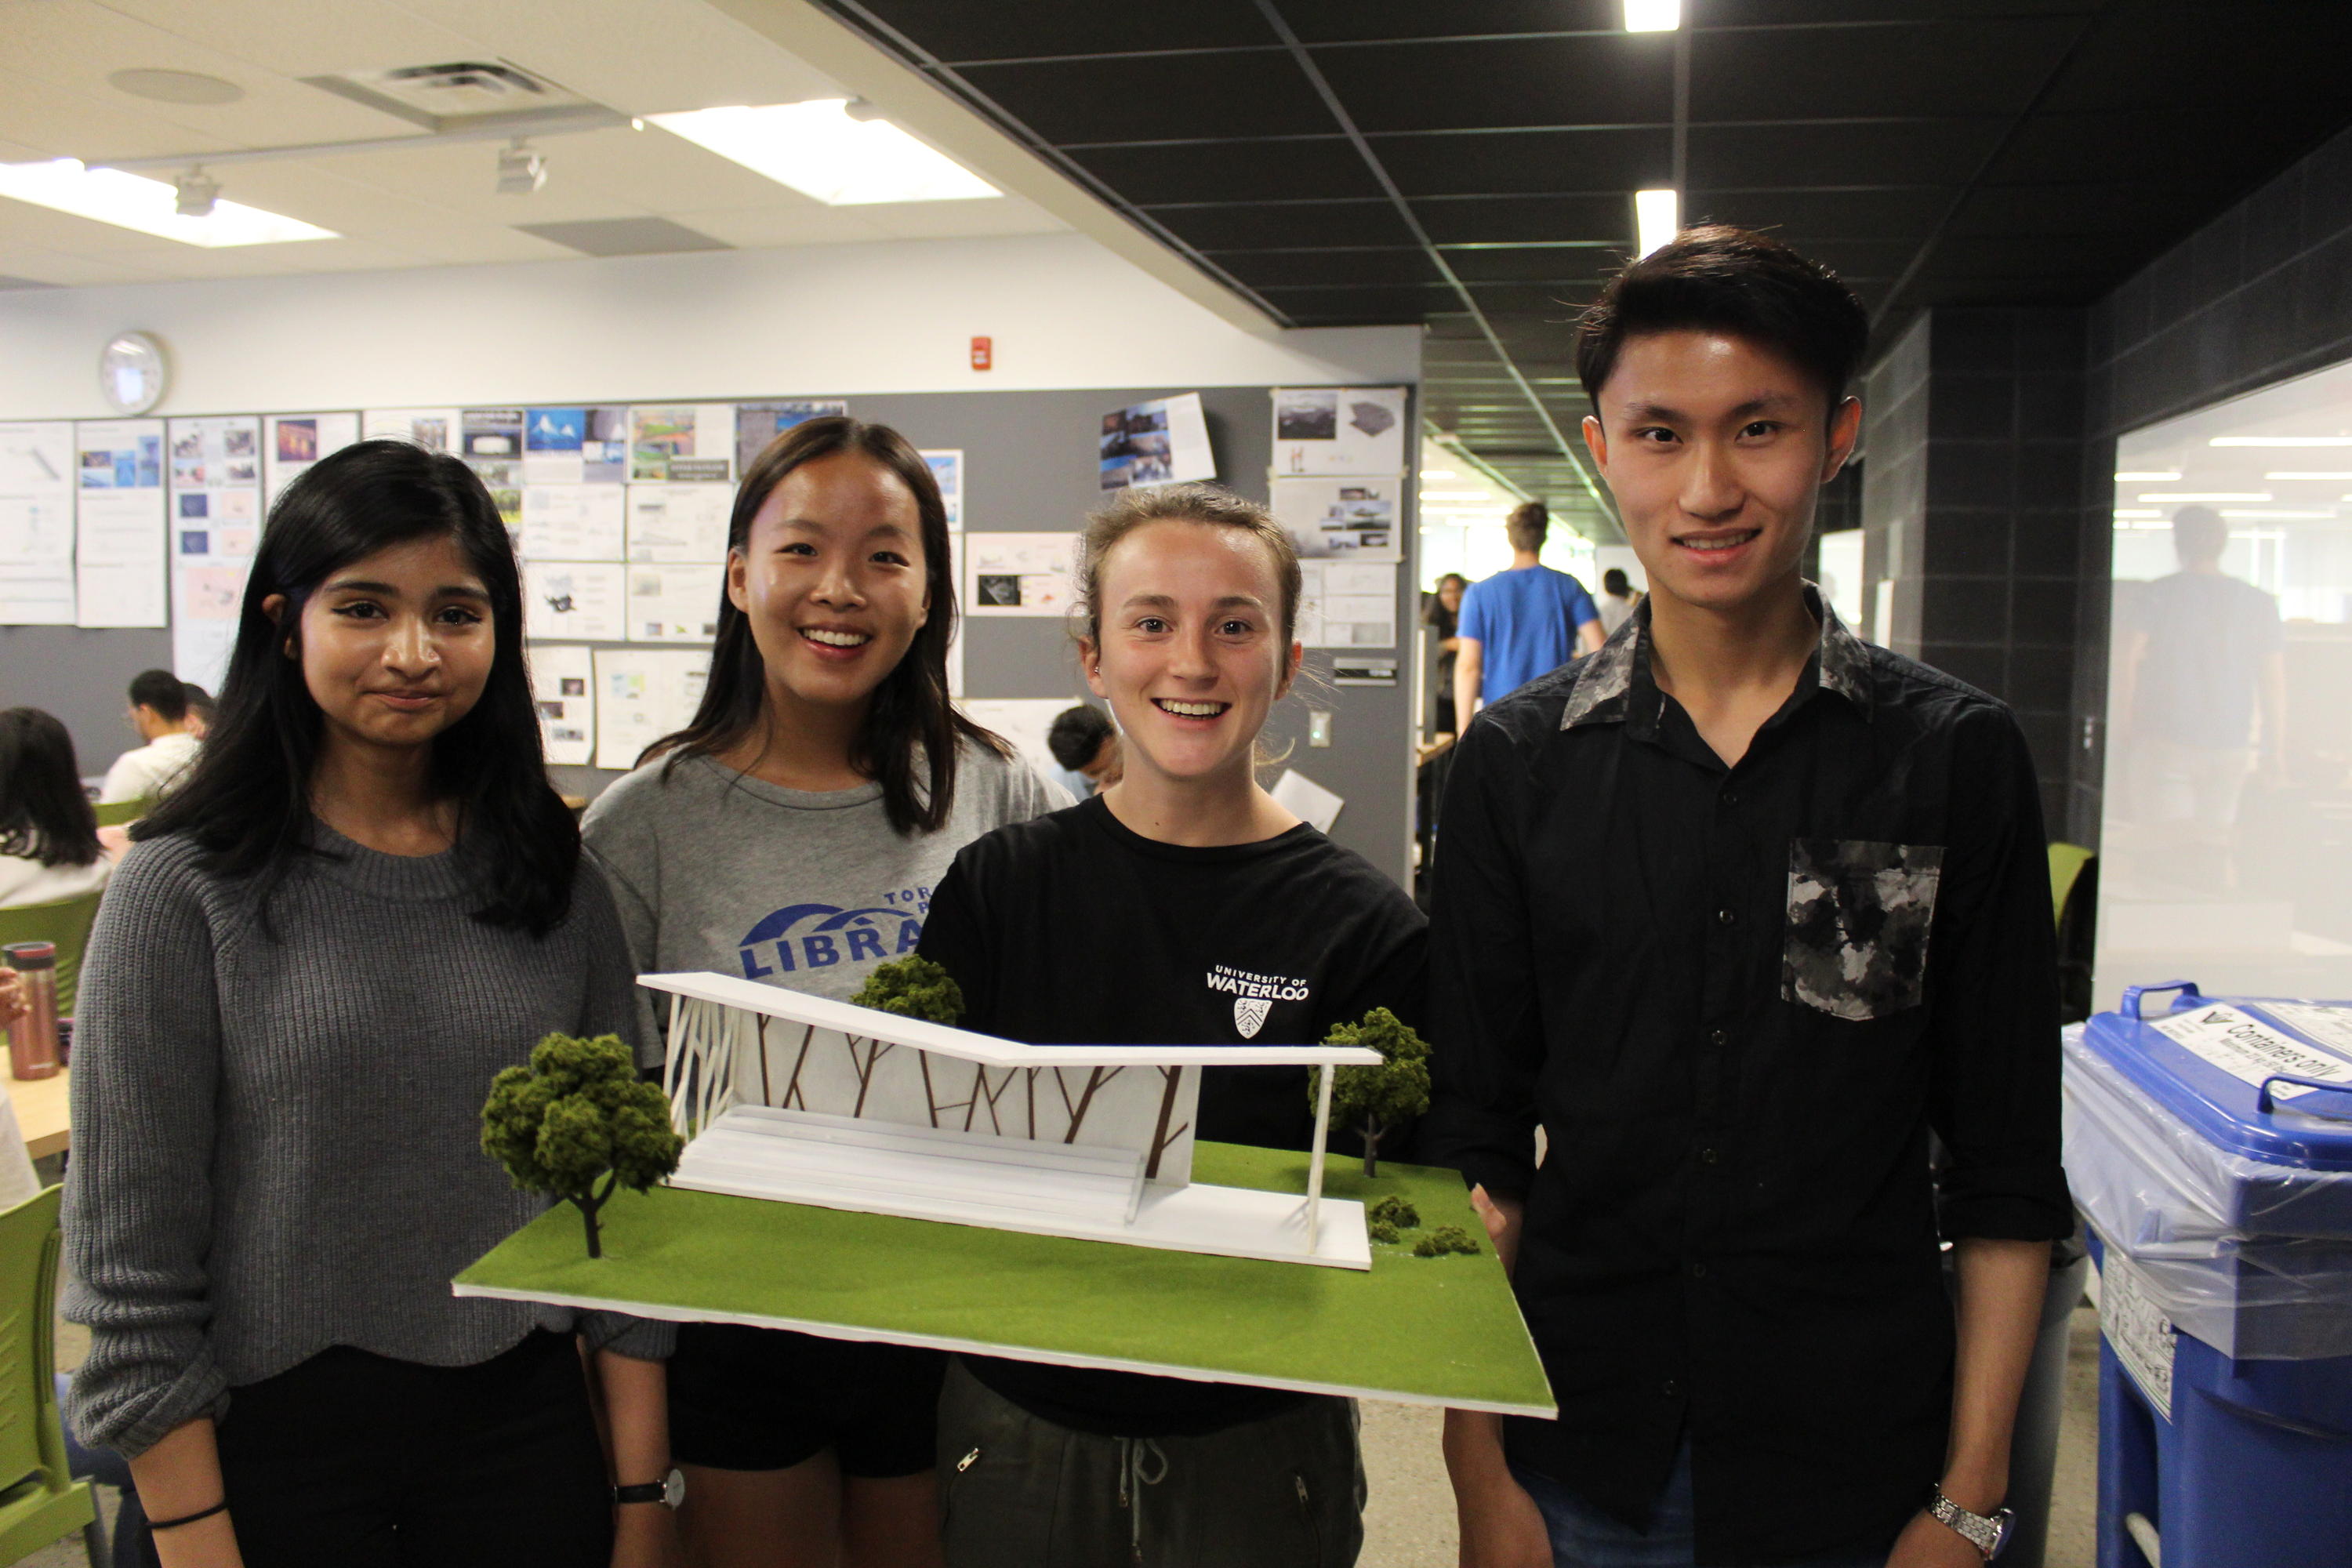 pavilion model with student group